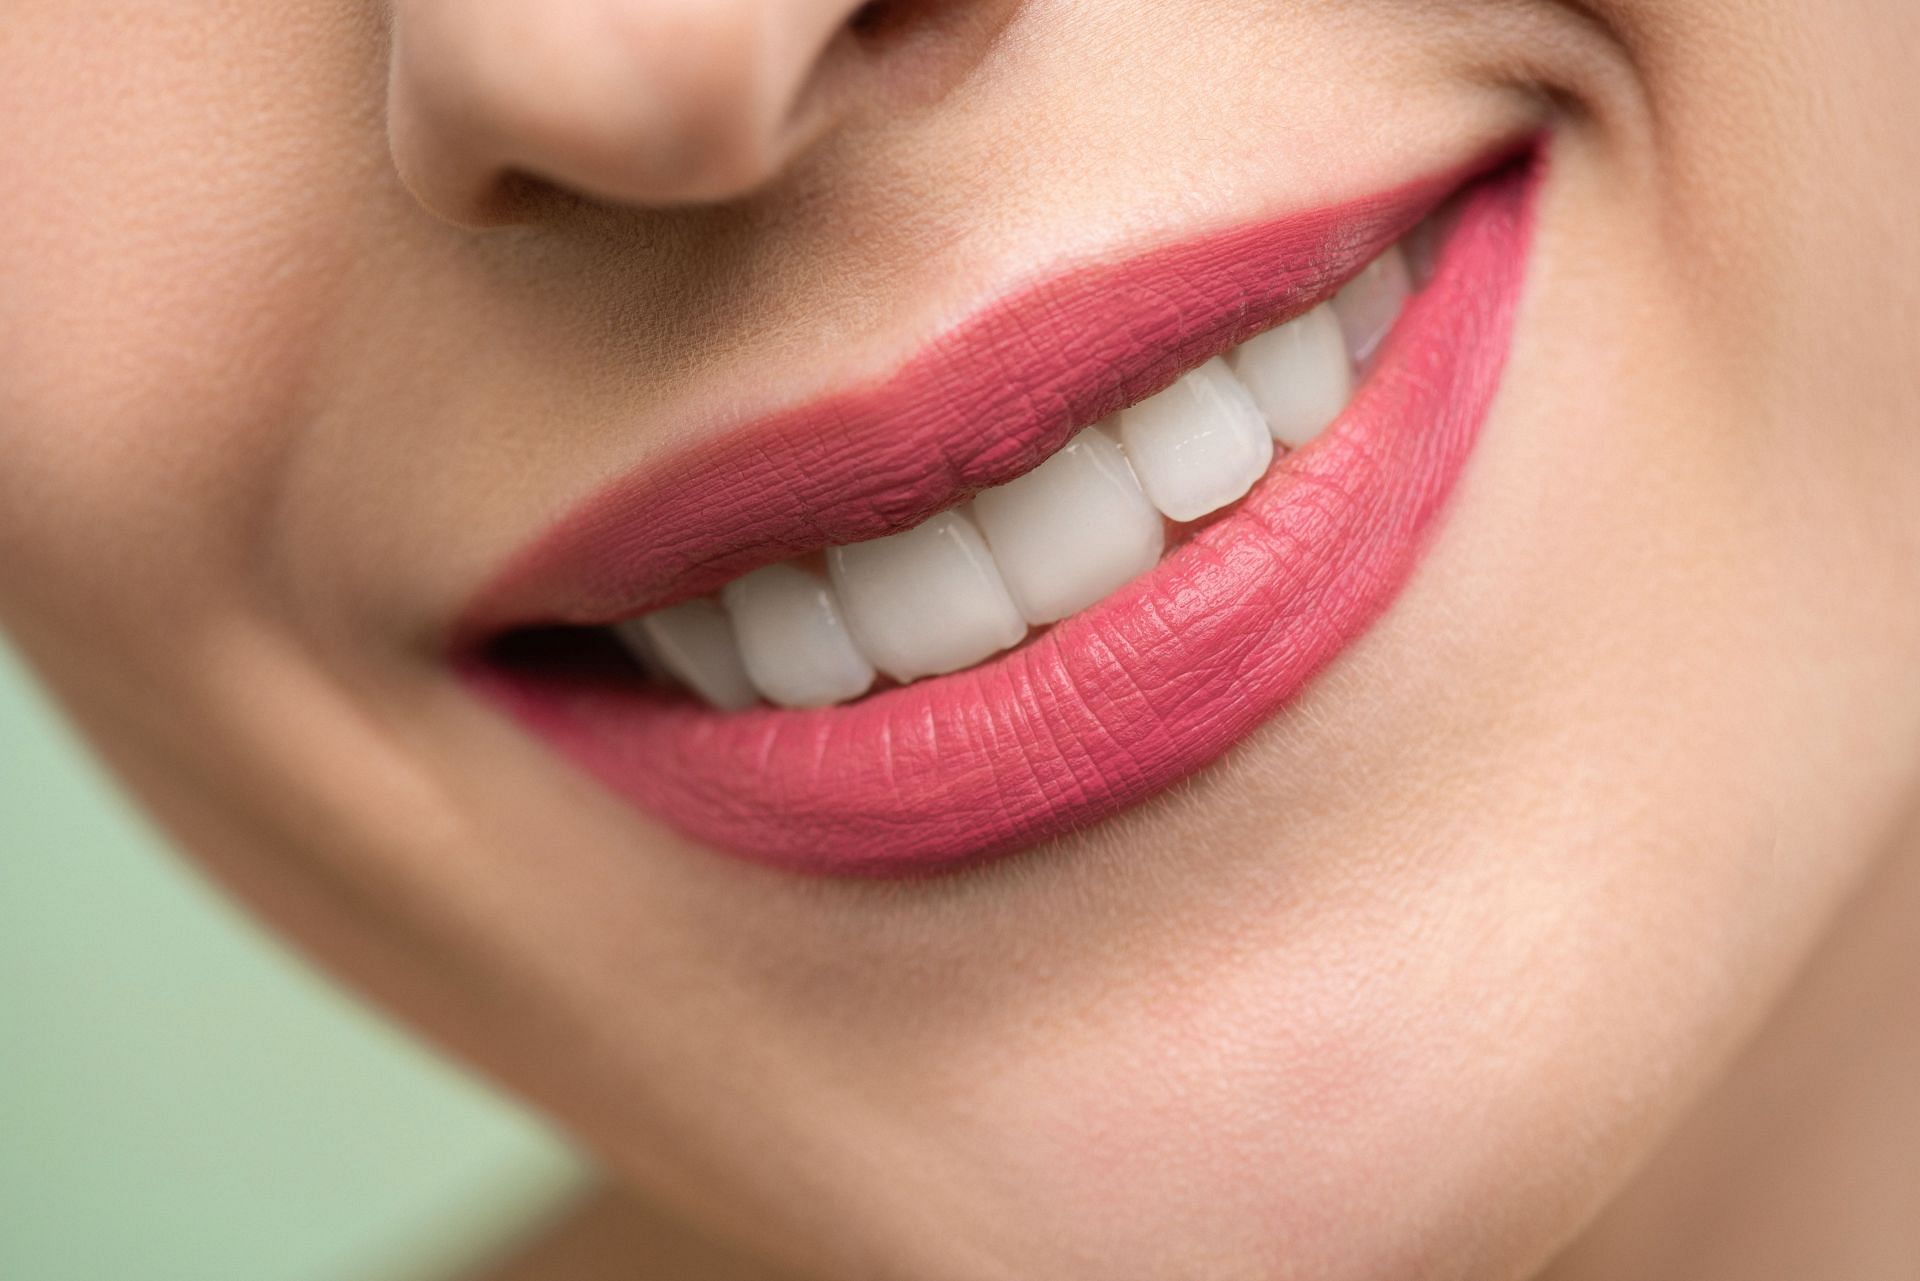 Healthy teeth and gums are essential for a vibrant smile (Image via Pexels)